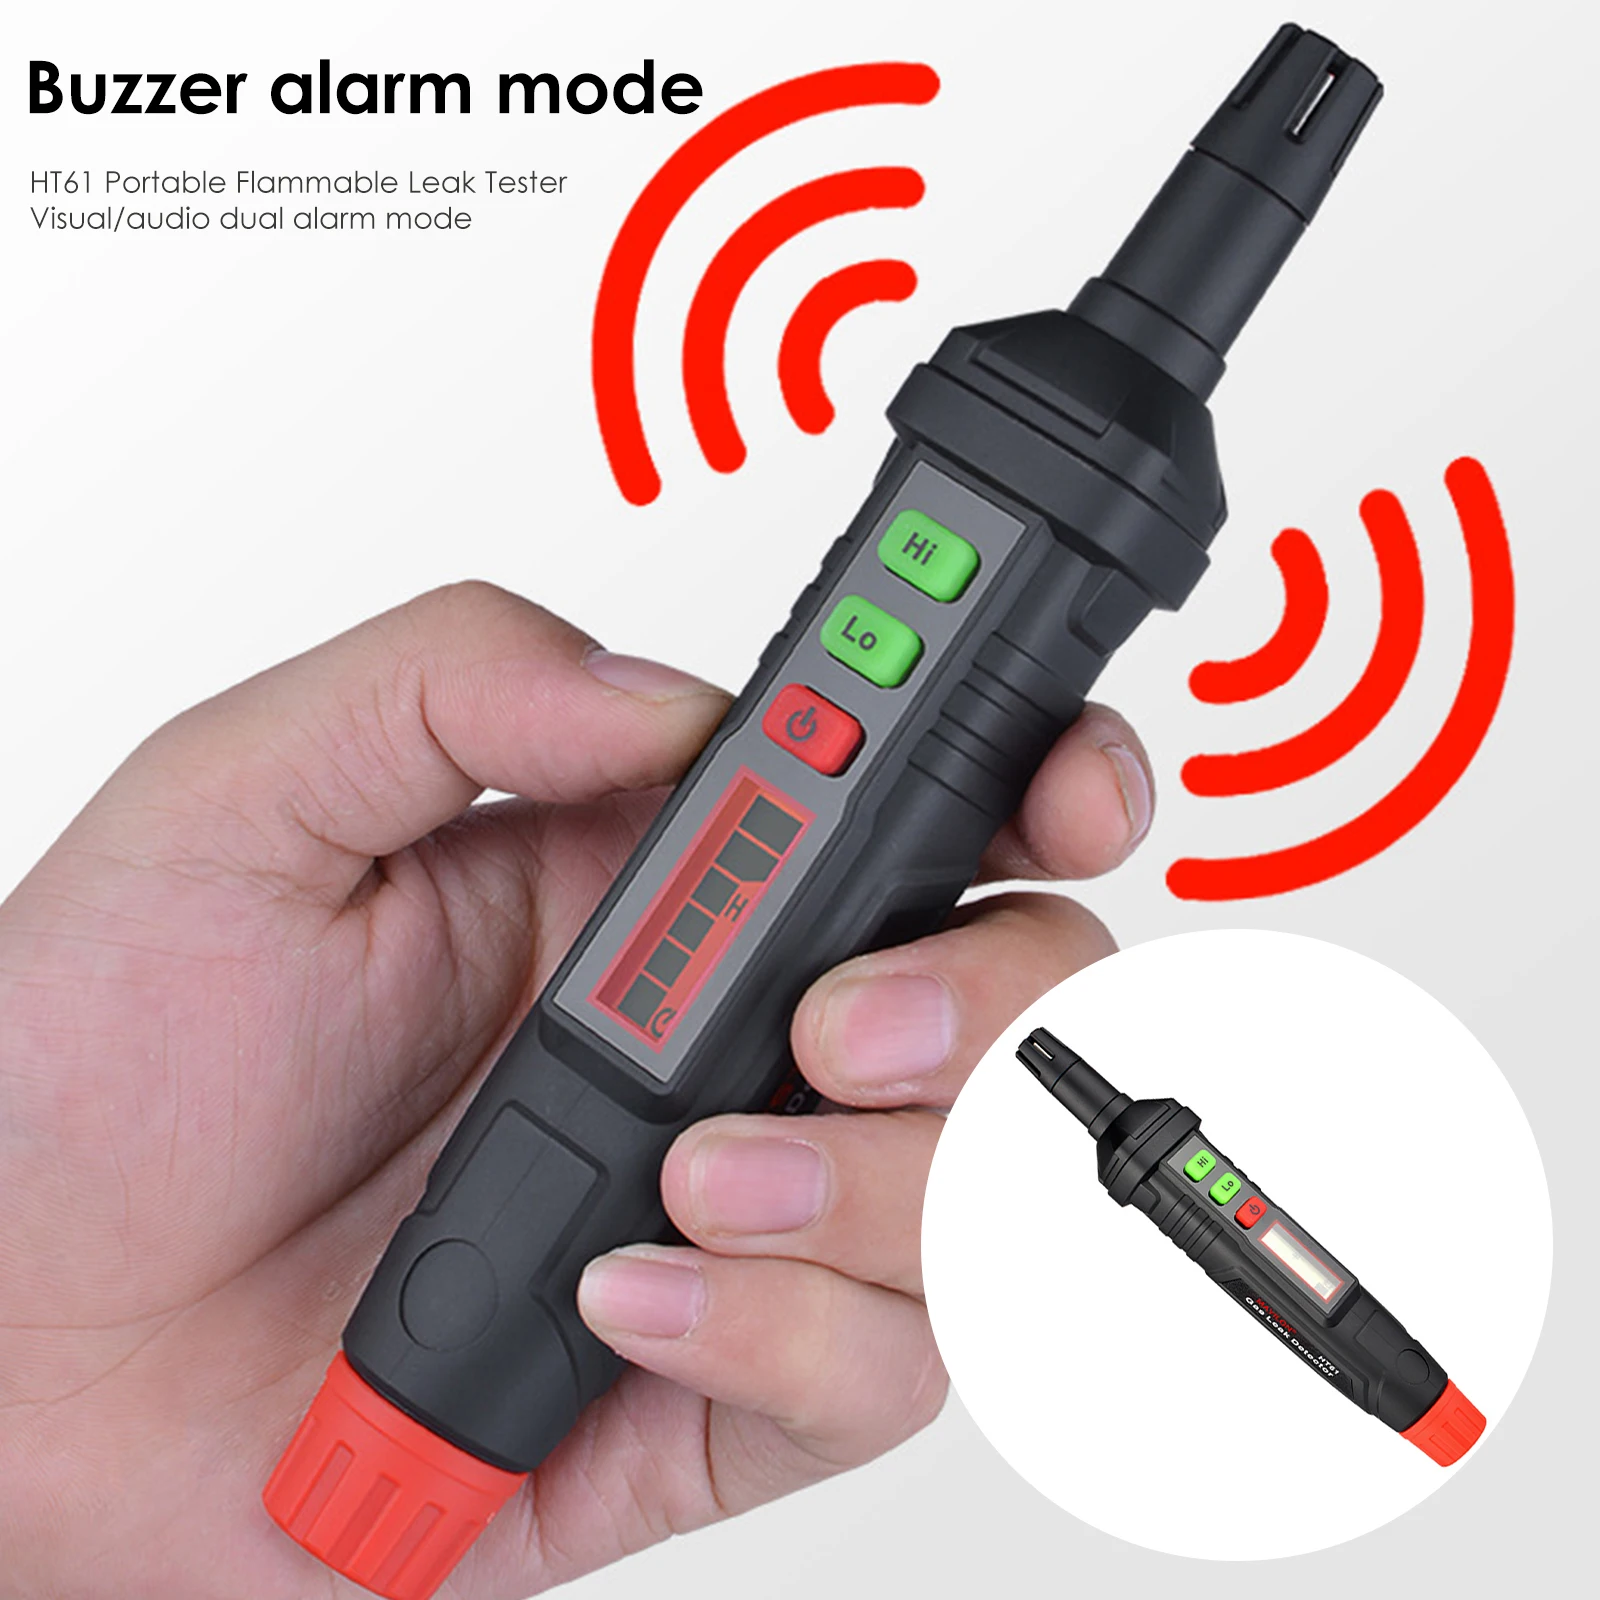 

Natural Gas Detector Pen Type Leak Detector Combustible Gas Meter Analyzer Monitor For Home Visible Audible Alarm HABOTEST HT61